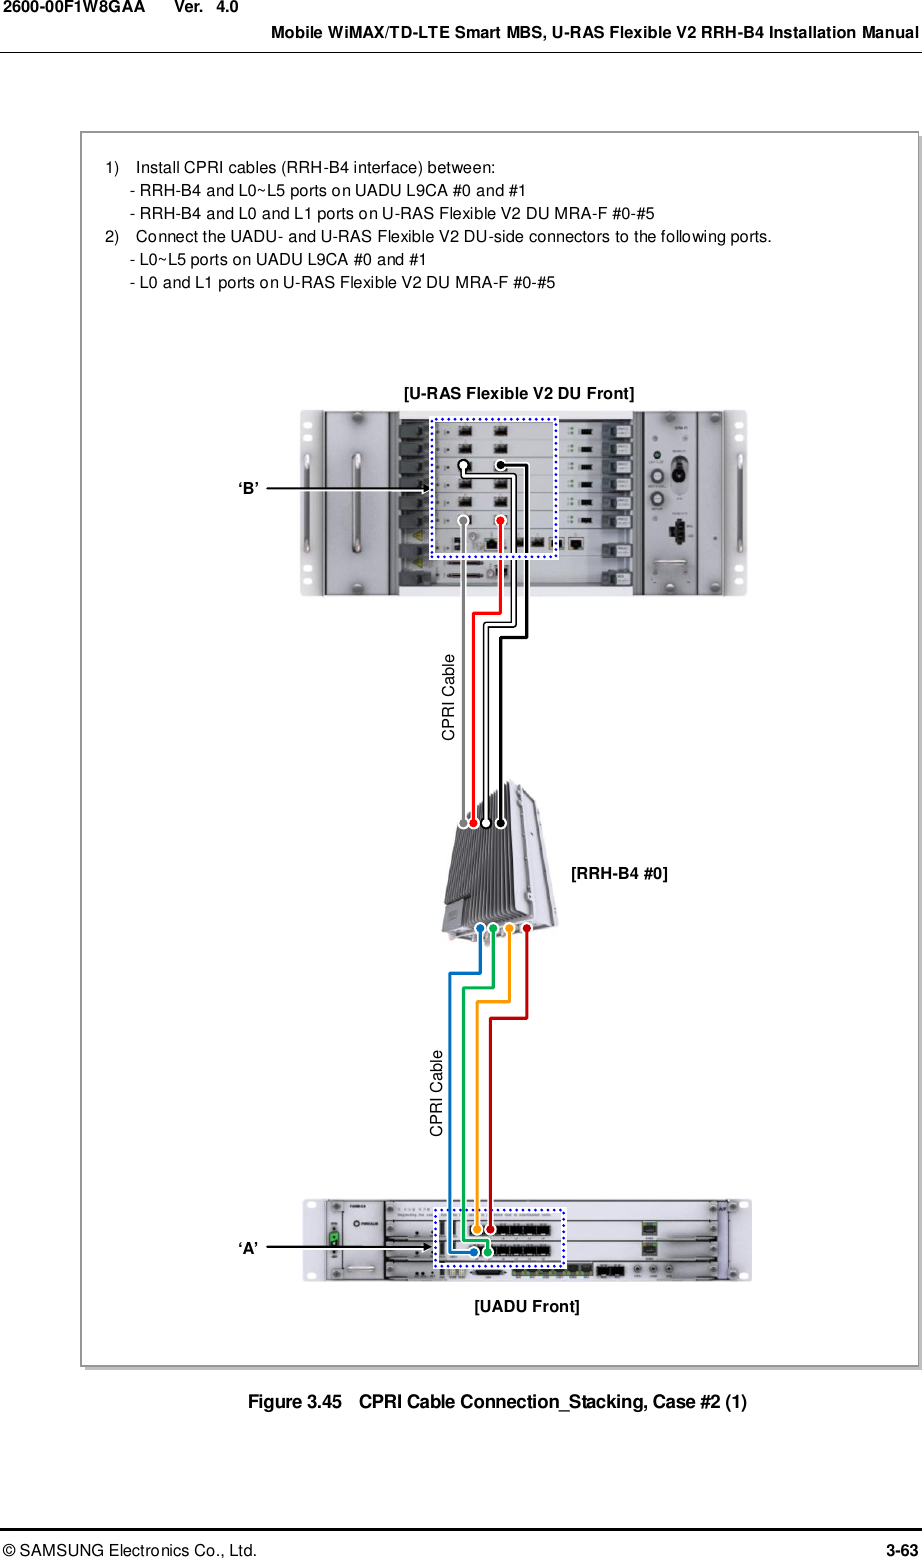  Ver.    Mobile WiMAX/TD-LTE Smart MBS, U-RAS Flexible V2 RRH-B4 Installation Manual ©  SAMSUNG Electronics Co., Ltd.  3-63 2600-00F1W8GAA 4.0  Figure 3.45  CPRI Cable Connection_Stacking, Case #2 (1)  [U-RAS Flexible V2 DU Front] 1)    Install CPRI cables (RRH-B4 interface) between: - RRH-B4 and L0~L5 ports on UADU L9CA #0 and #1 - RRH-B4 and L0 and L1 ports on U-RAS Flexible V2 DU MRA-F #0-#5 2)    Connect the UADU- and U-RAS Flexible V2 DU-side connectors to the following ports. - L0~L5 ports on UADU L9CA #0 and #1 - L0 and L1 ports on U-RAS Flexible V2 DU MRA-F #0-#5 [RRH-B4 #0] [UADU Front] ‘A’ ‘B’ CPRI Cable CPRI Cable [U-RAS Flexible V2 DU Front] 